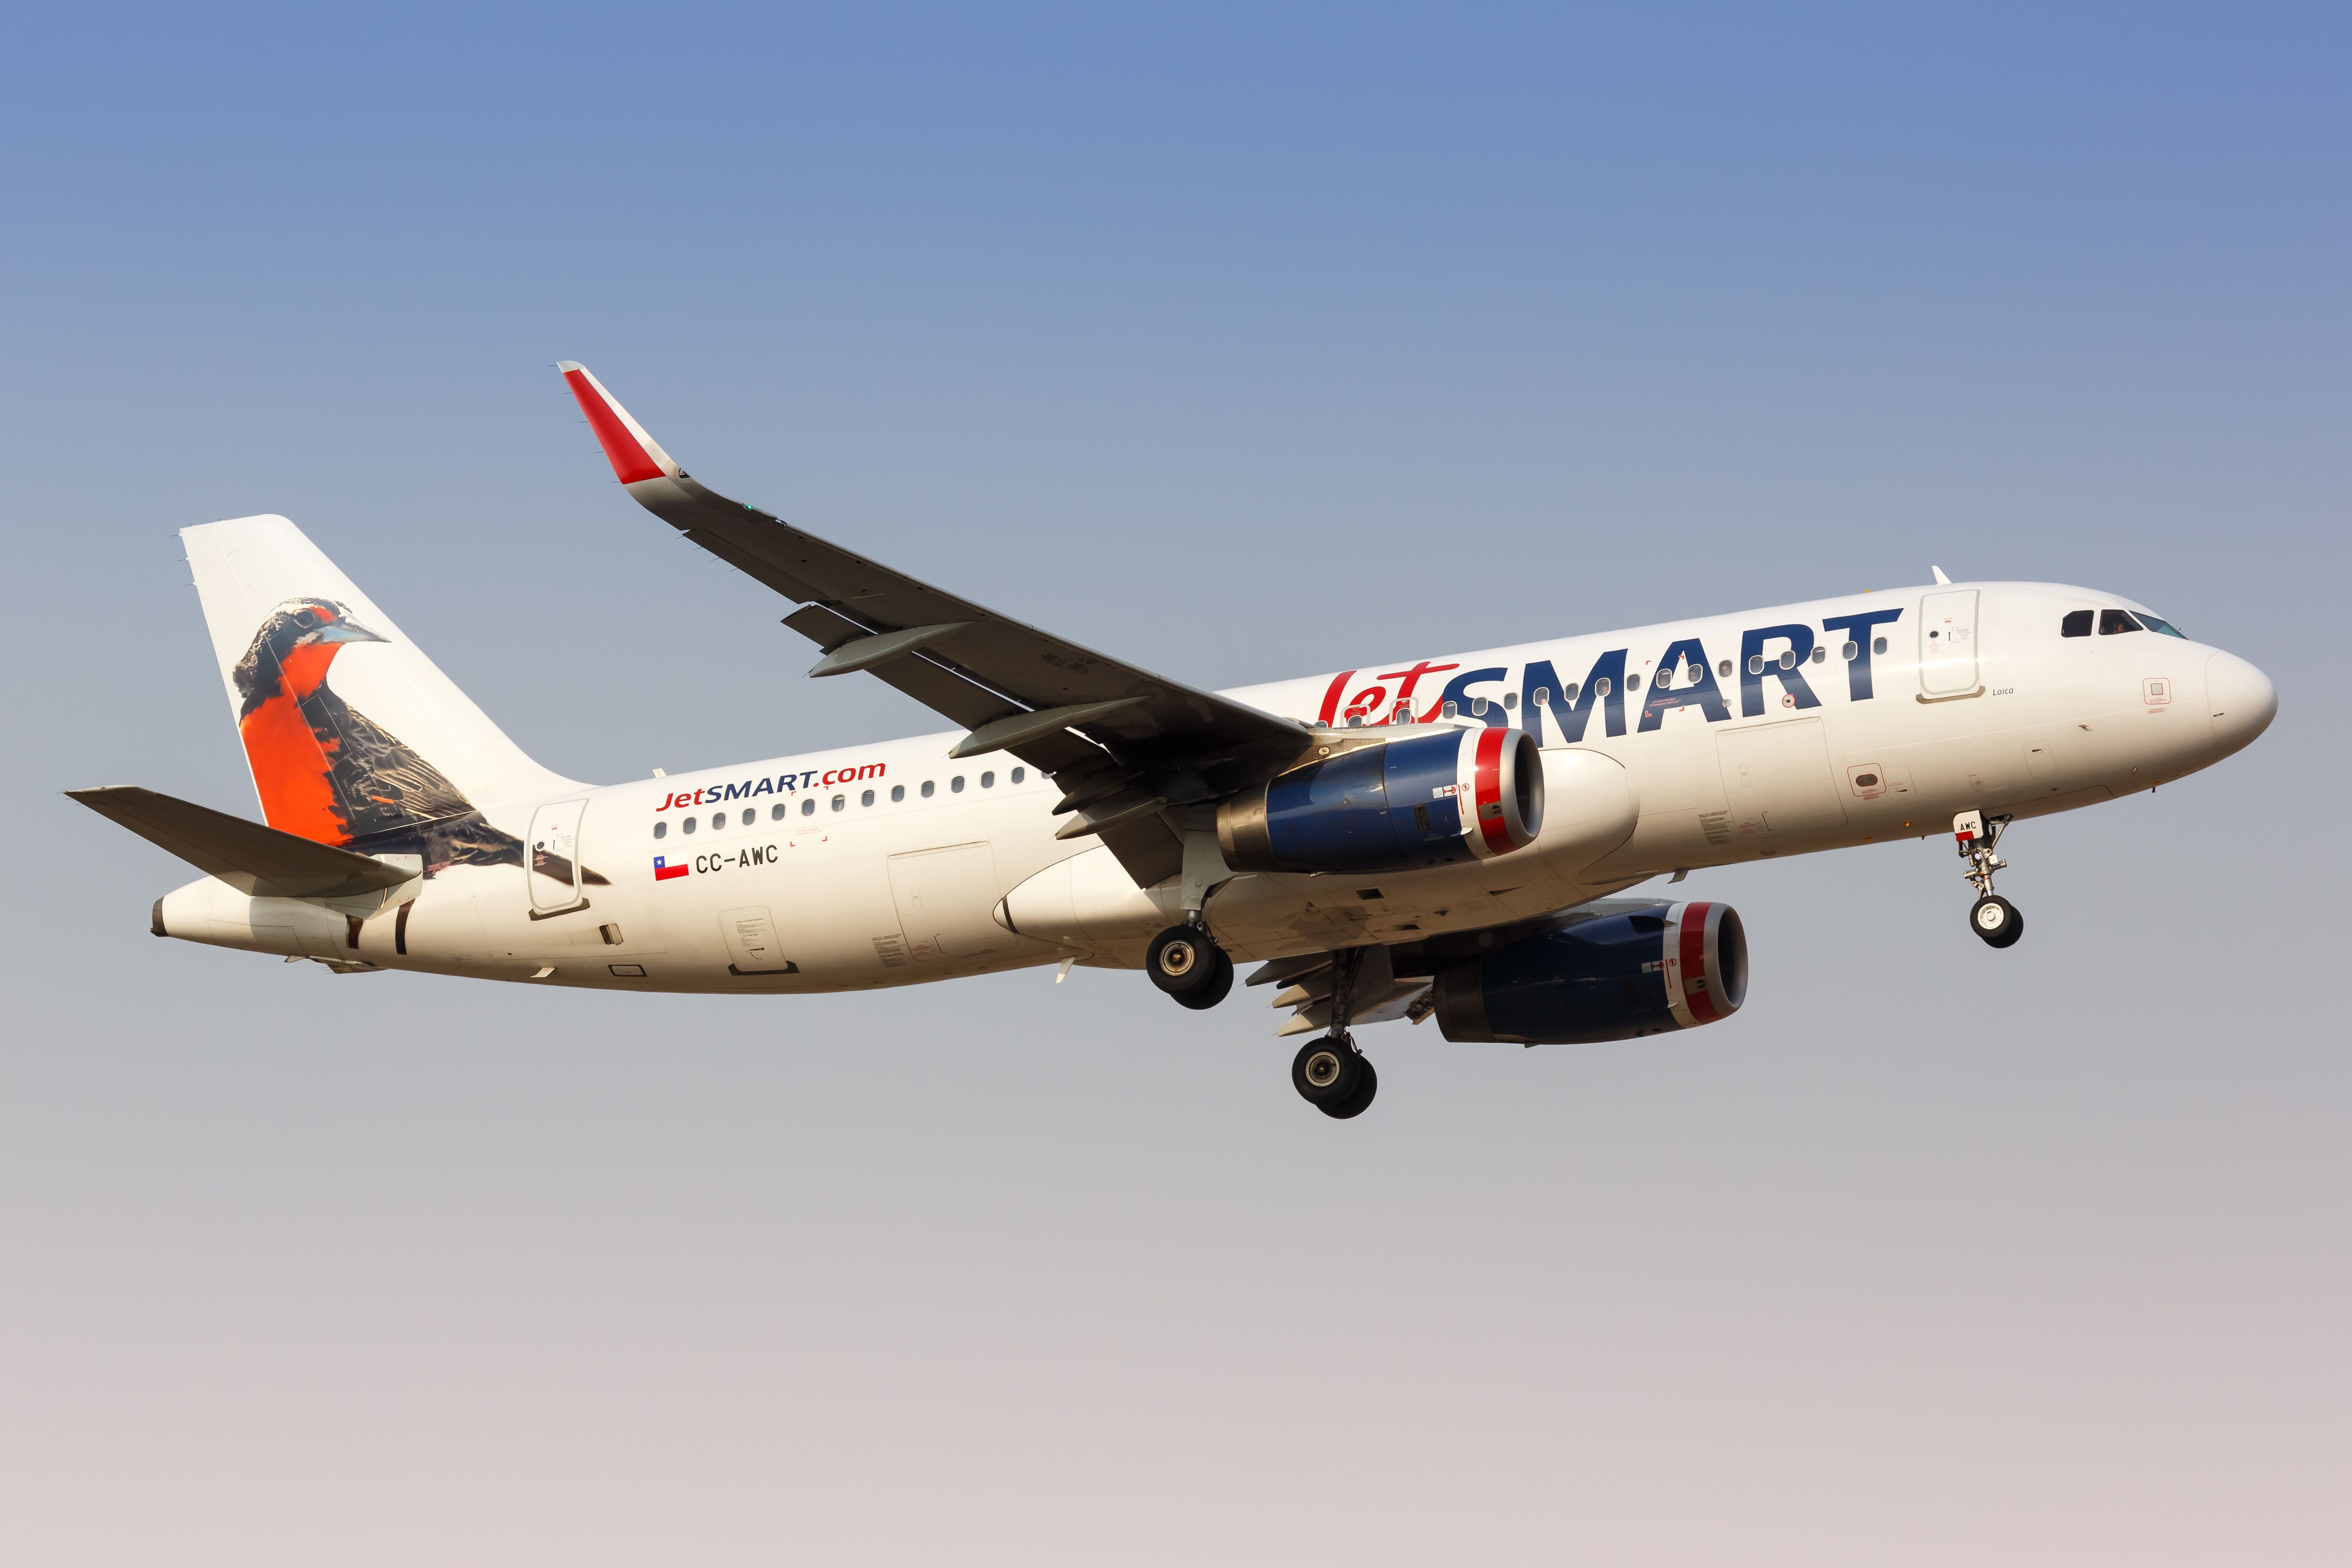 A JetSMART Airbus A320 flying in the sky.